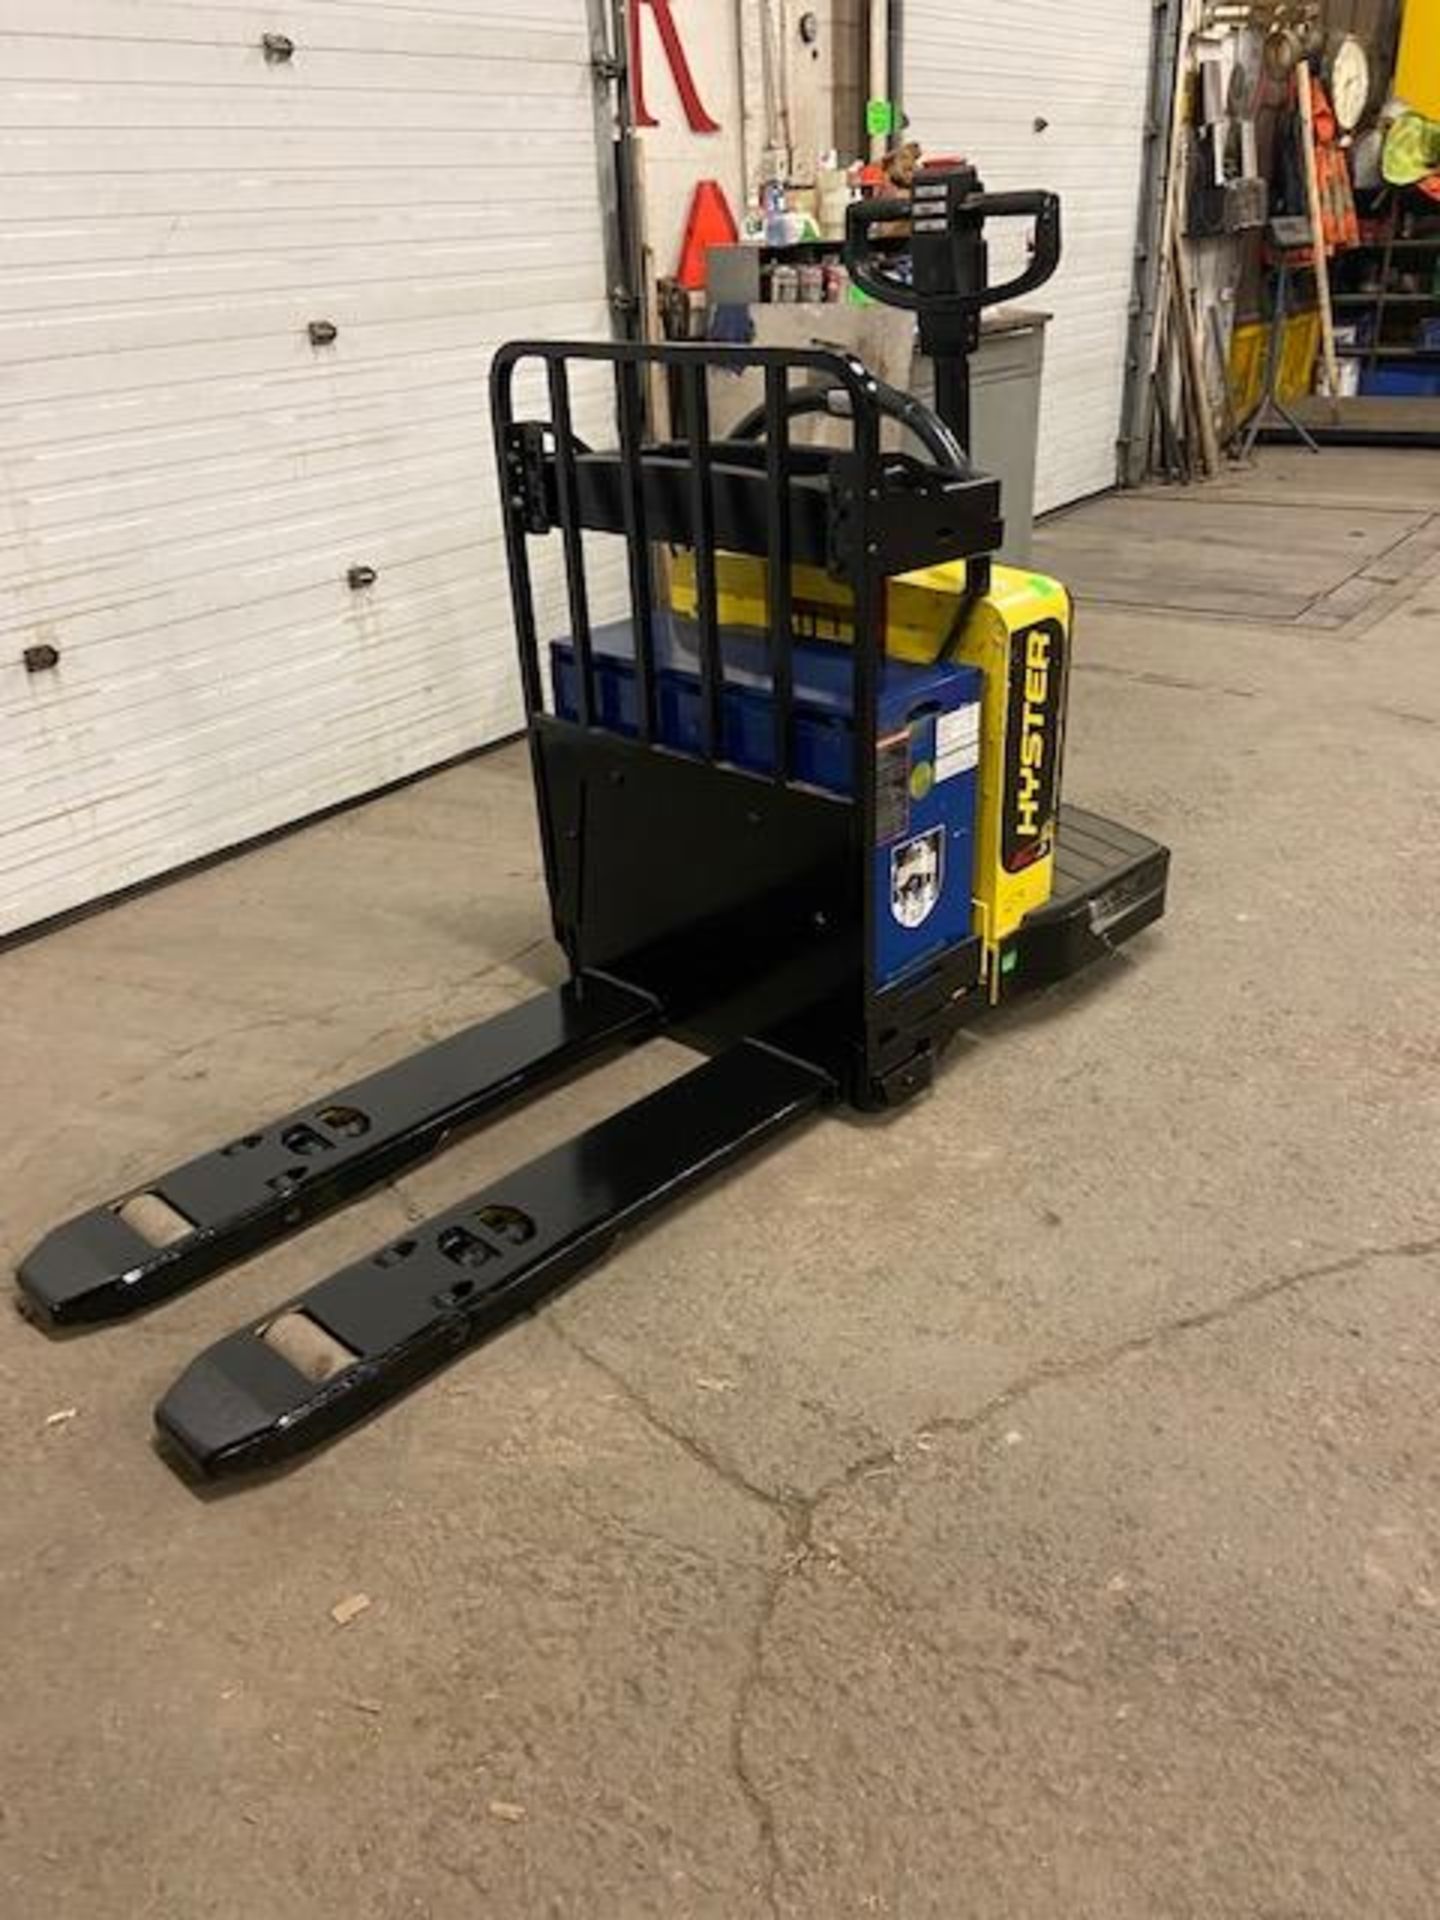 2012 Hyster Ride On Walk Behind Electric Powered Pallet Cart Walkie Lift 6000lbs capacity with - Image 2 of 3